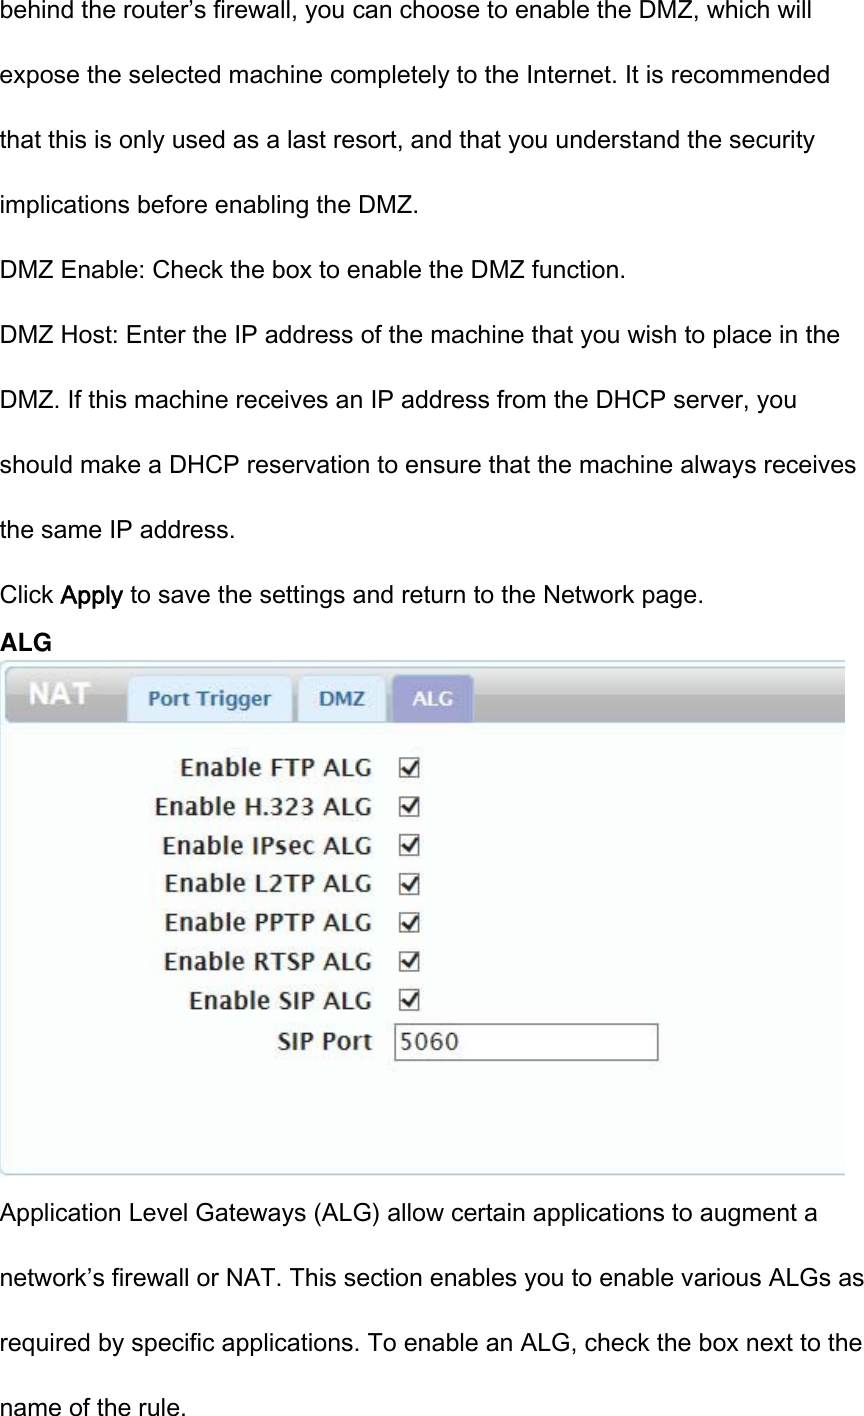 behind the router’s firewall, you can choose to enable the DMZ, which will expose the selected machine completely to the Internet. It is recommended that this is only used as a last resort, and that you understand the security implications before enabling the DMZ. DMZ Enable: Check the box to enable the DMZ function. DMZ Host: Enter the IP address of the machine that you wish to place in the DMZ. If this machine receives an IP address from the DHCP server, you should make a DHCP reservation to ensure that the machine always receives the same IP address. Click Apply to save the settings and return to the Network page. ALG  Application Level Gateways (ALG) allow certain applications to augment a network’s firewall or NAT. This section enables you to enable various ALGs as required by specific applications. To enable an ALG, check the box next to the name of the rule. 